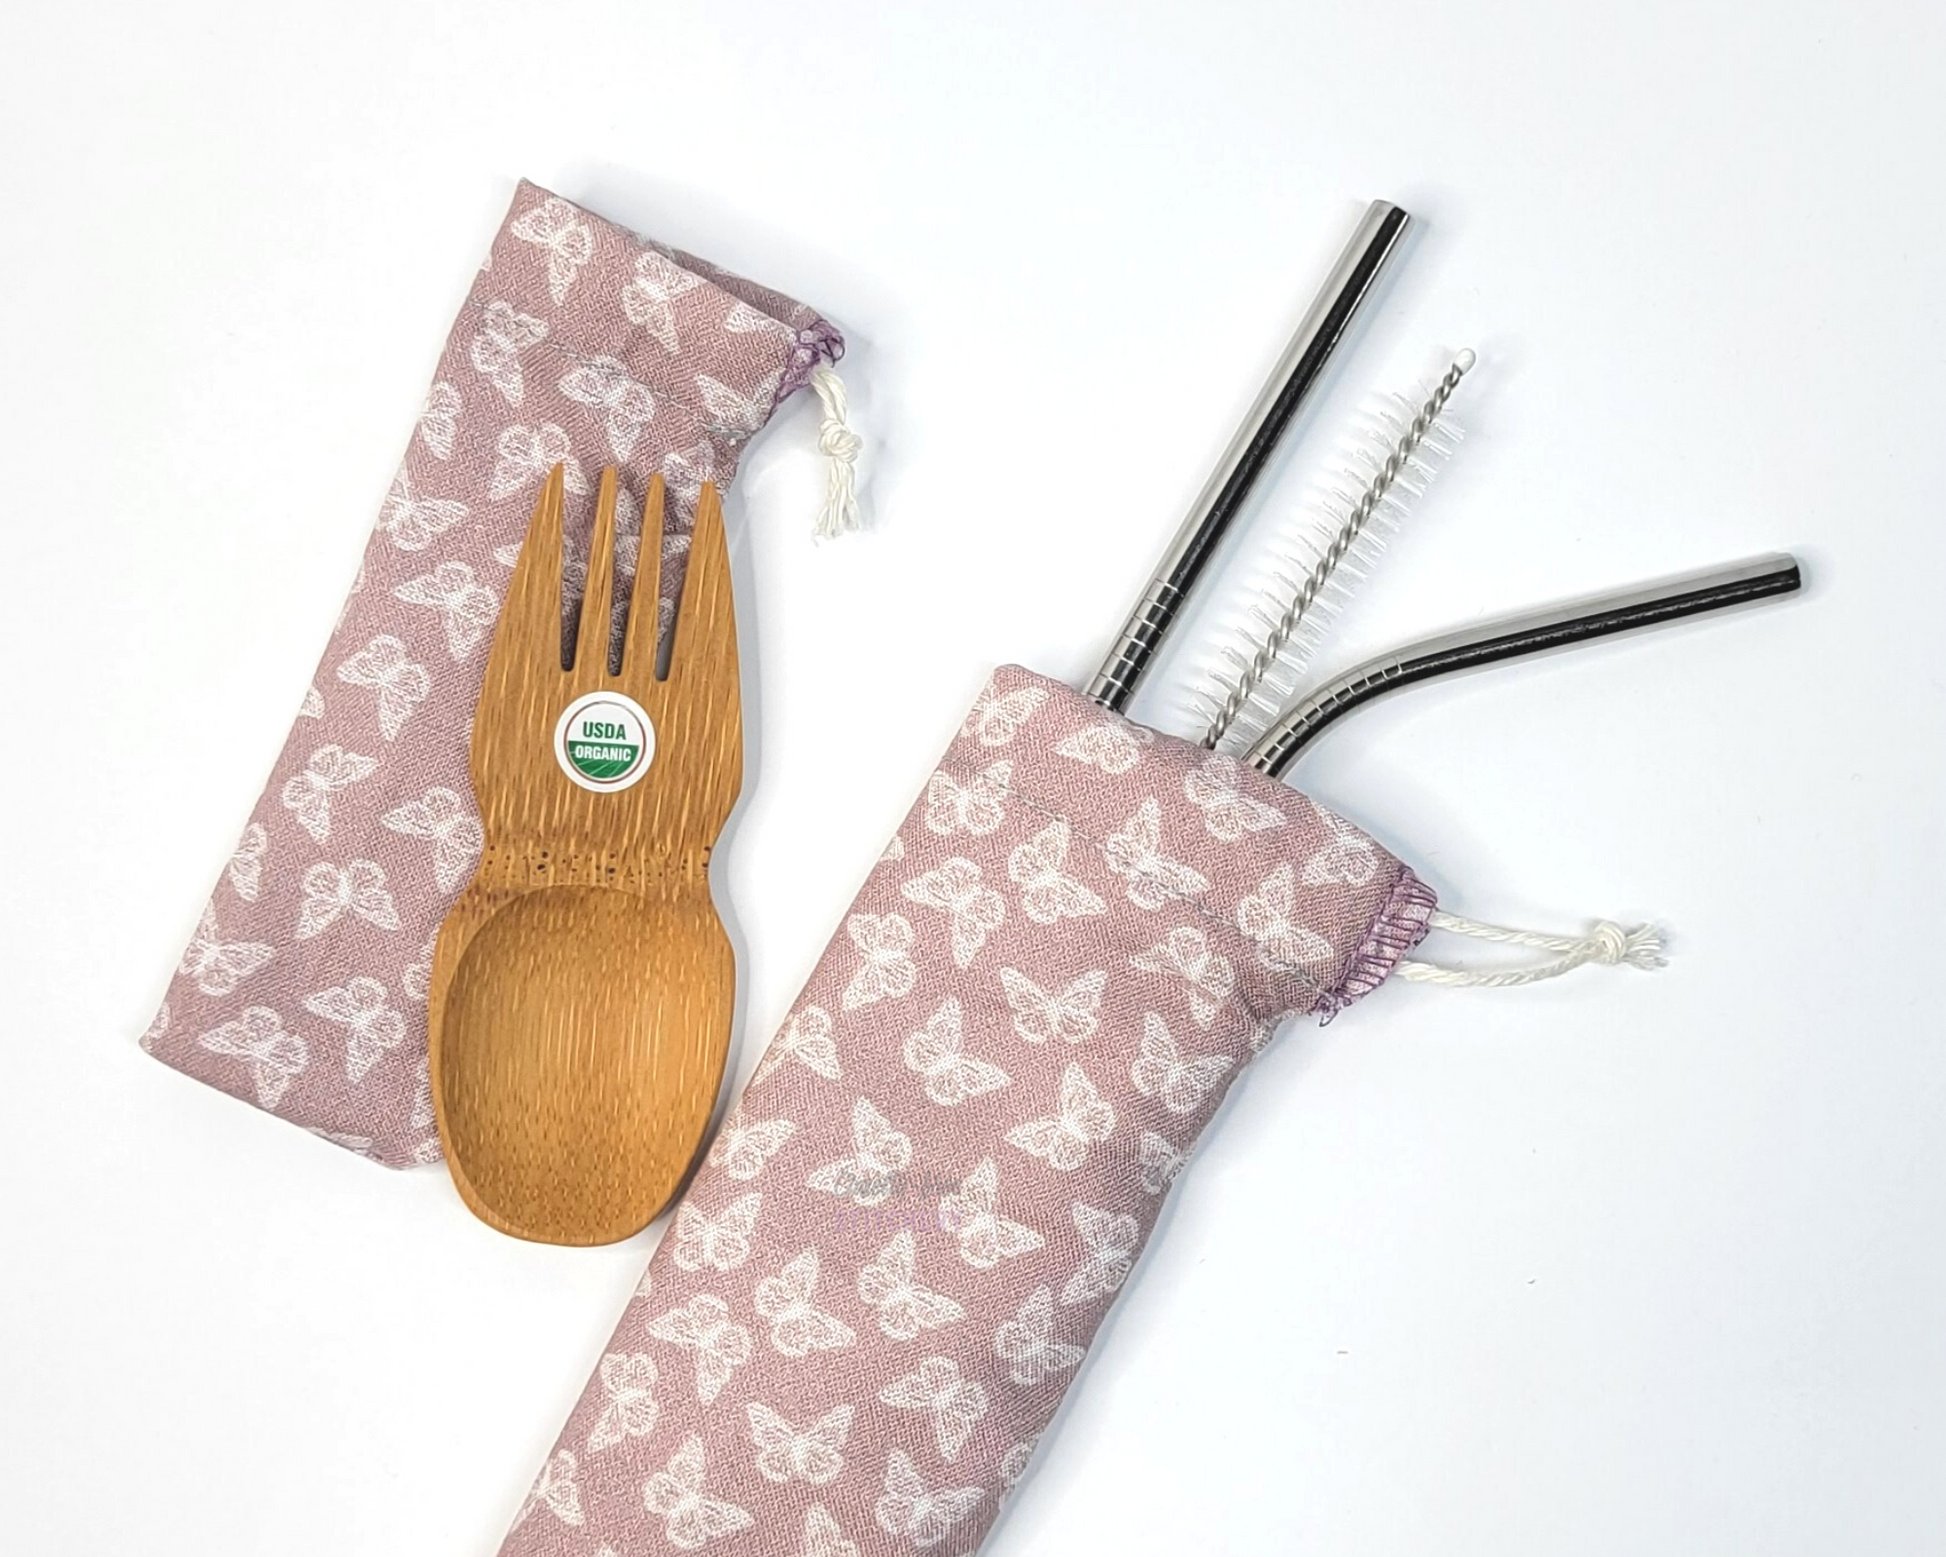 Reusable bamboo spork and stainless steel straw pouch set. The pouches are both a light mauve pink with tiny white butterflies.